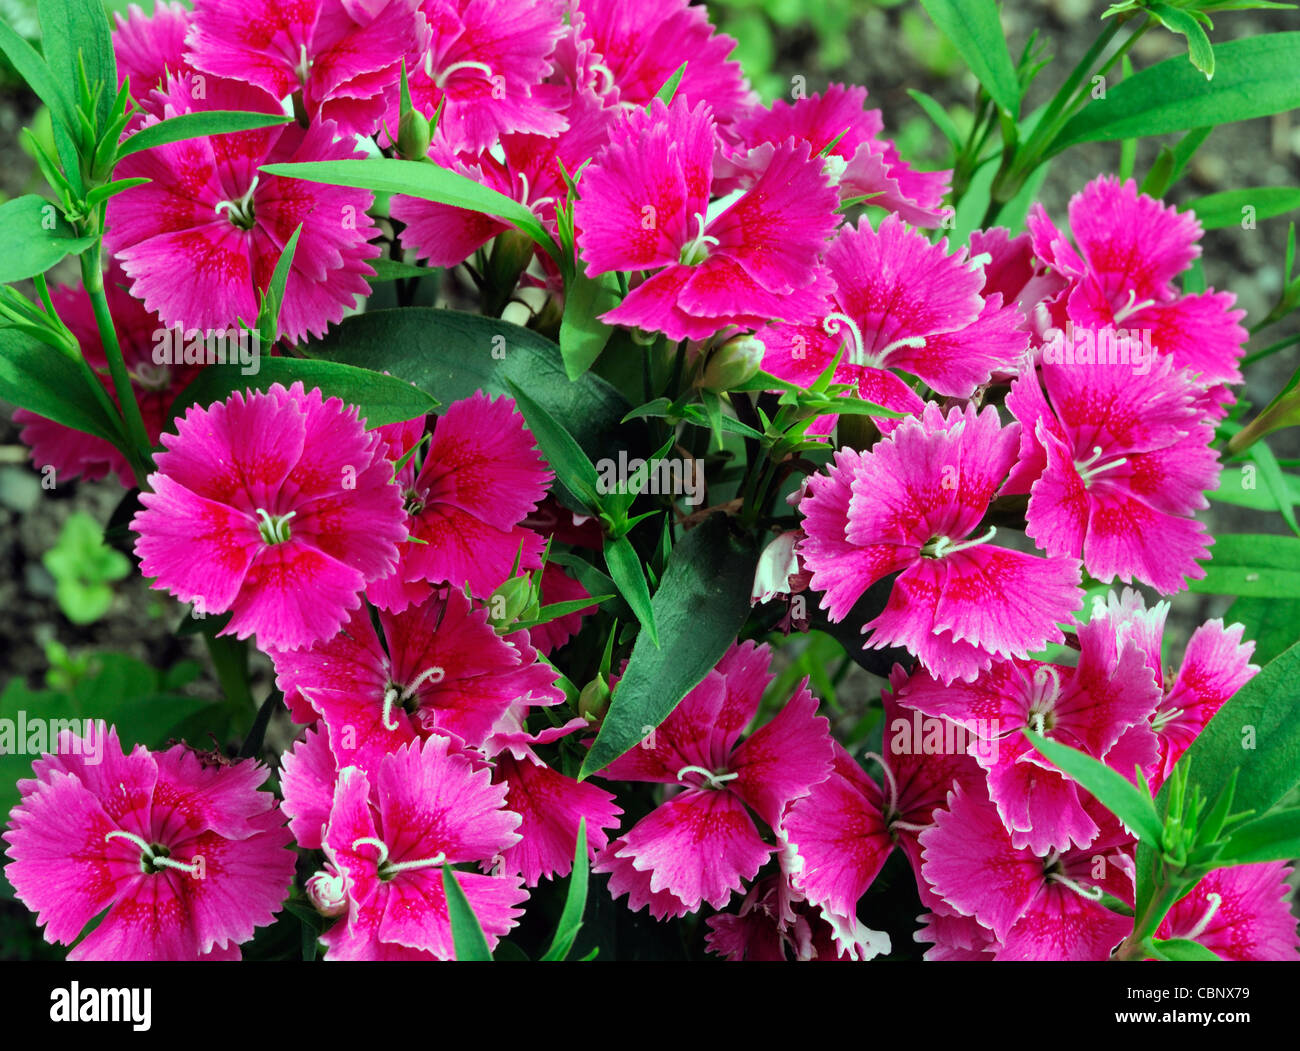 Dianthus Ideal Select Raspberry Chinensis x Barbatus hardy annual bright pink carnation flowers blooms blossoms Stock Photo